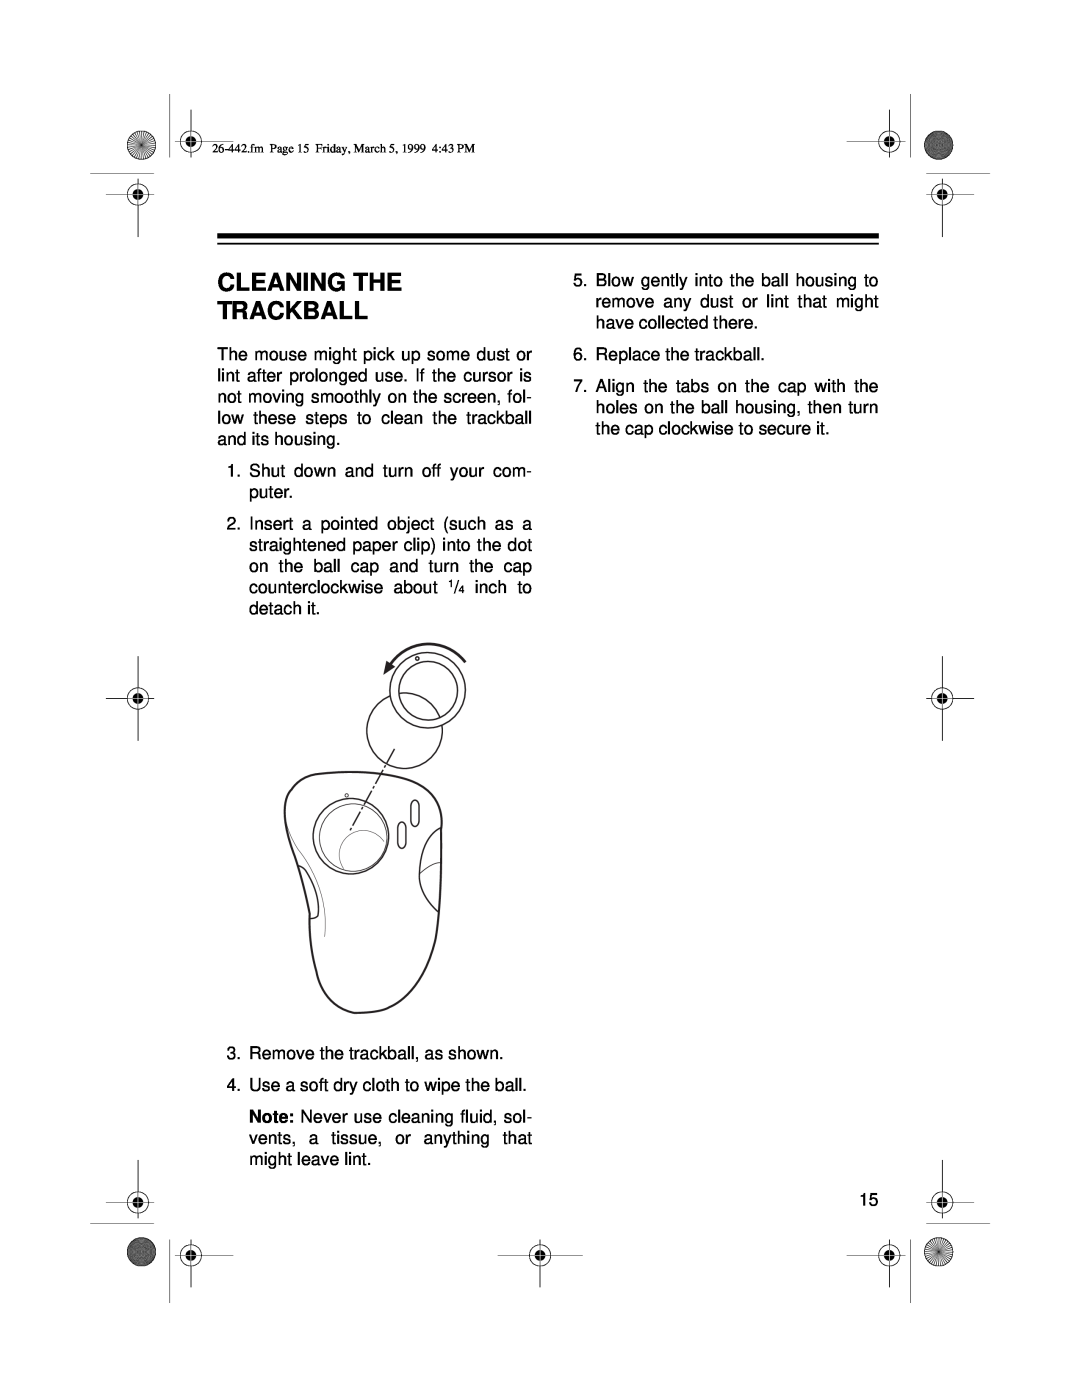 Radio Shack 26-442 owner manual Cleaning The Trackball 